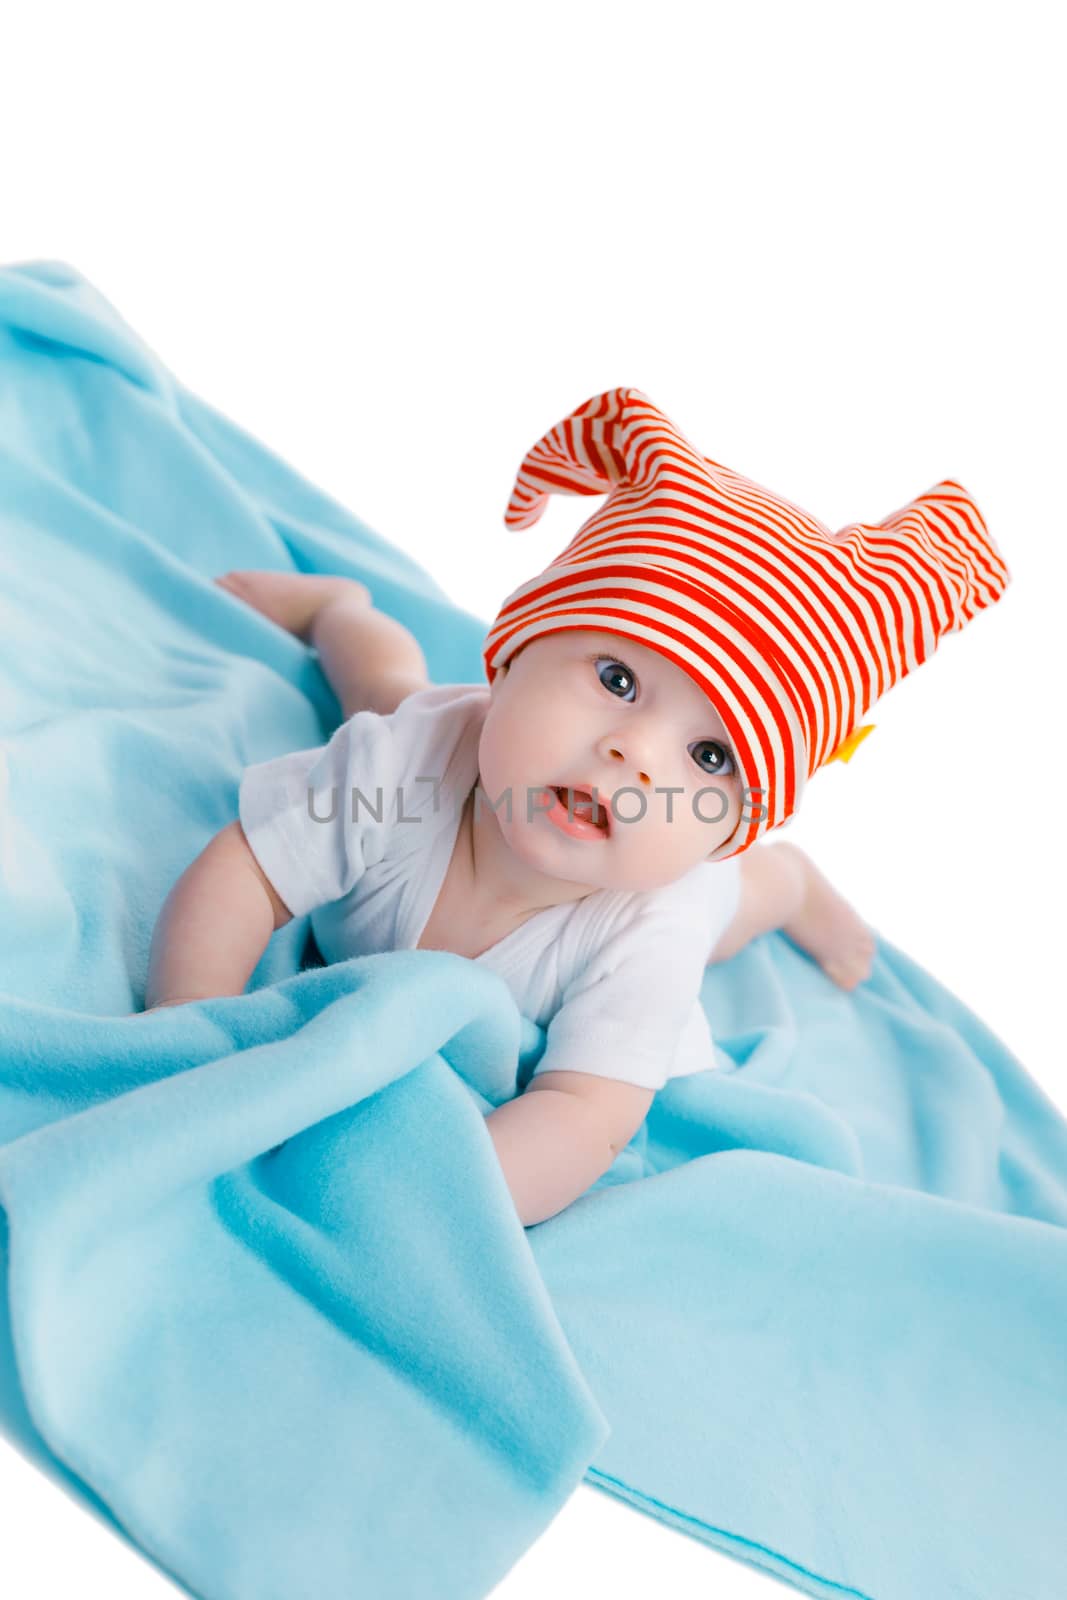 baby in a striped hat on a blue blanket